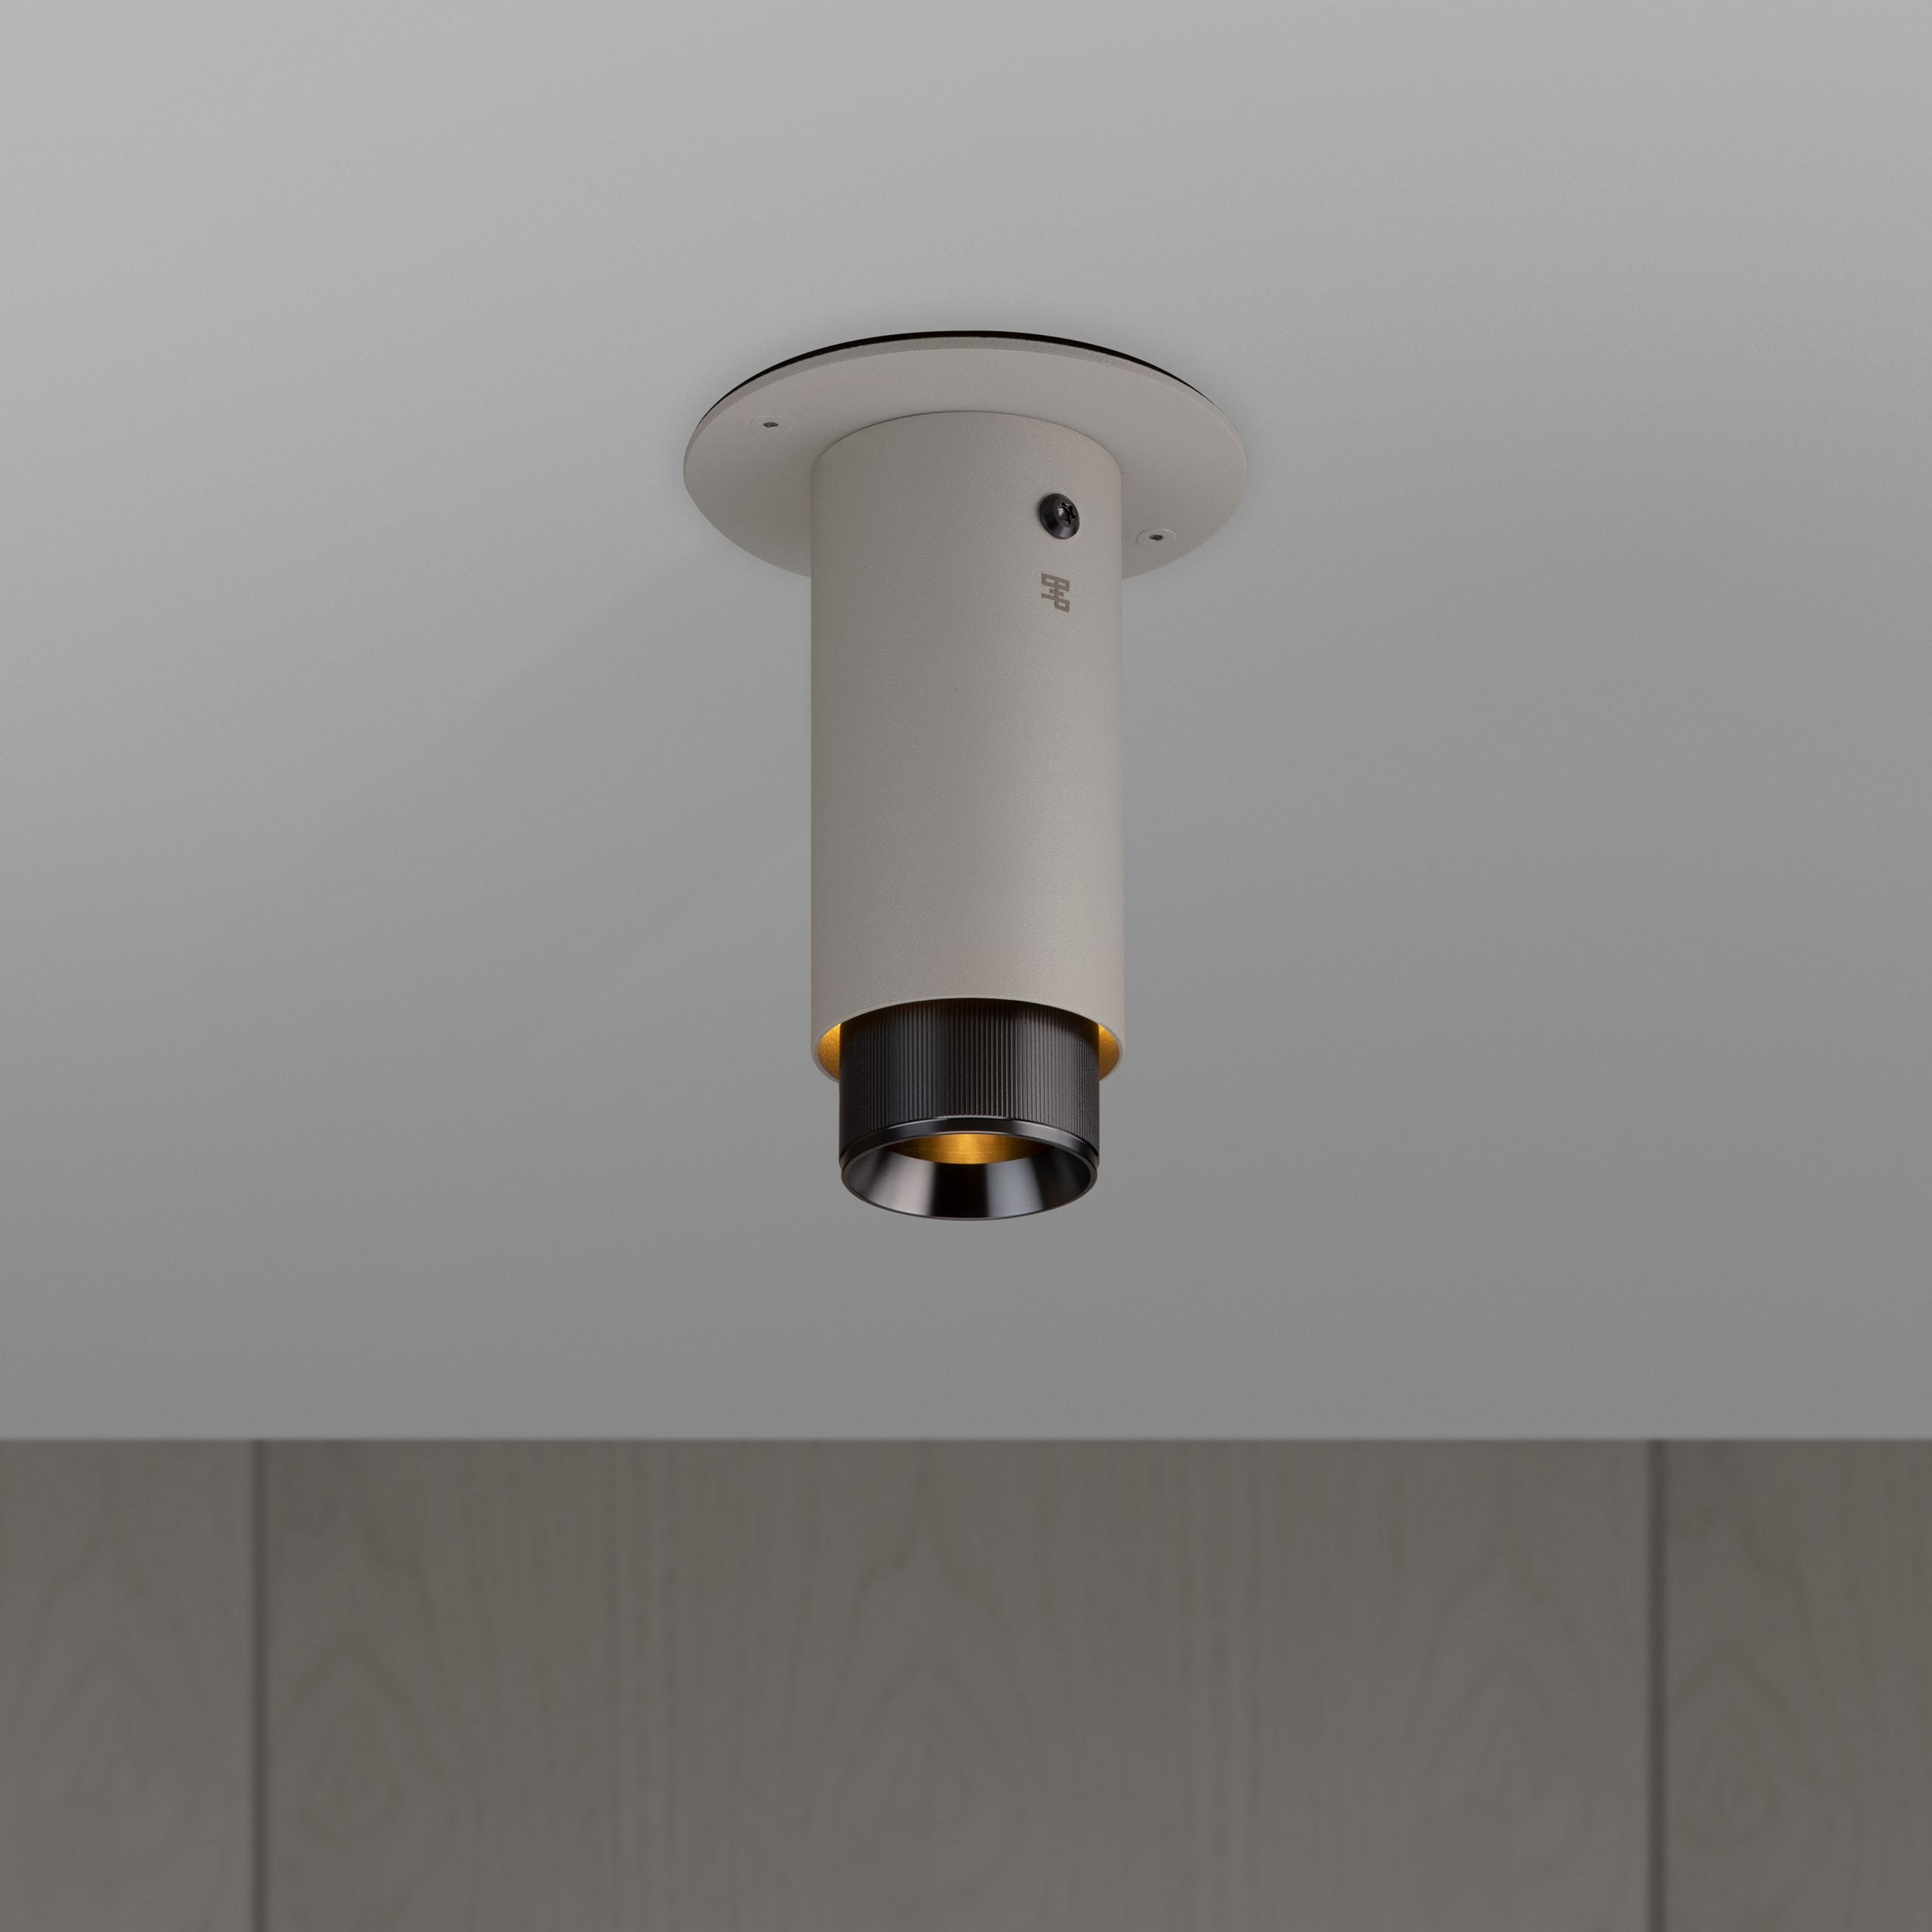 Buster + Punch Exhaust Surface Flush Mount Ceiling Light Buster + Punch Stone & Brass  